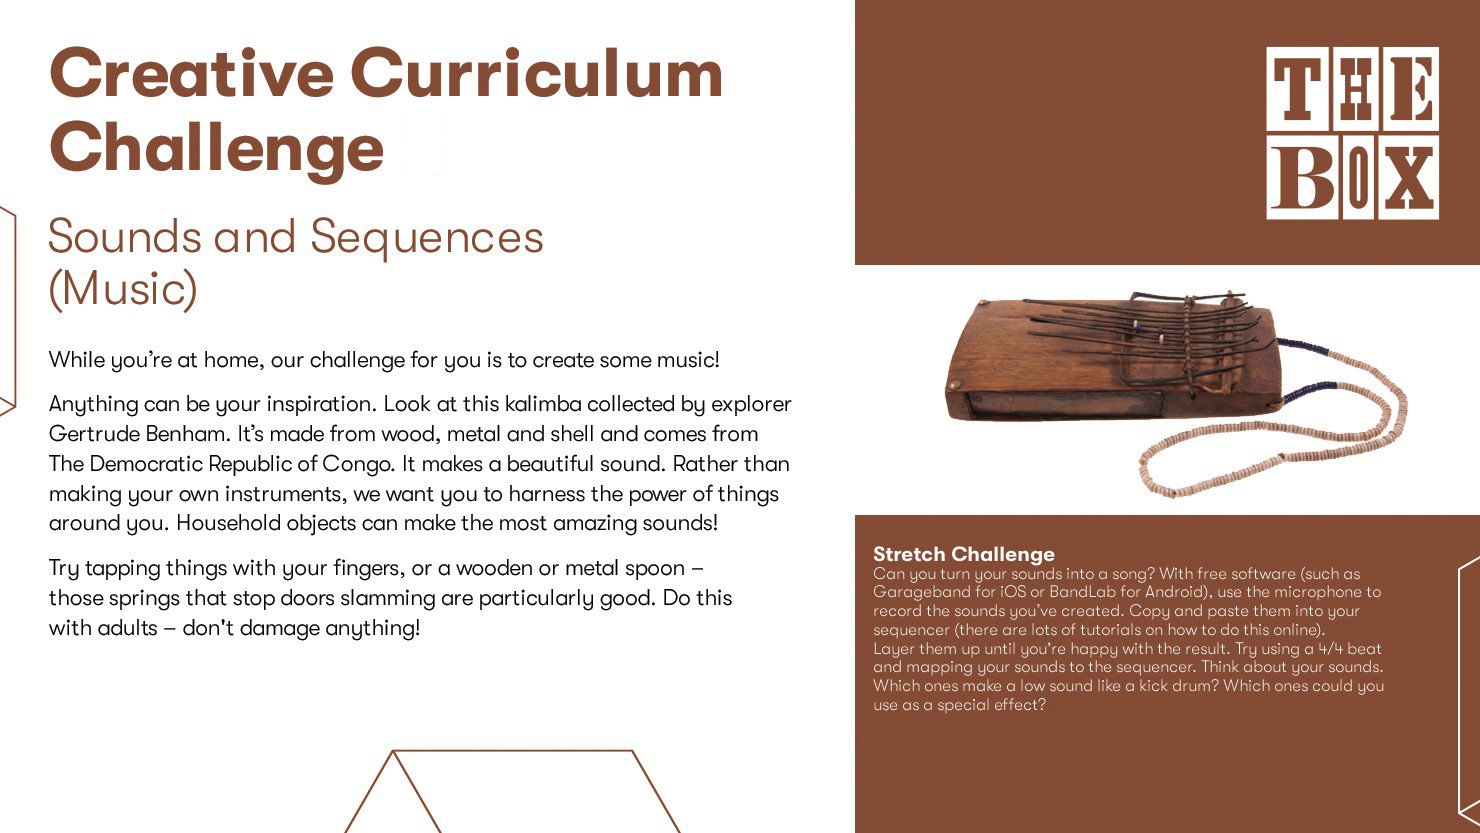 Graphic for The Box's music curriculum challenge